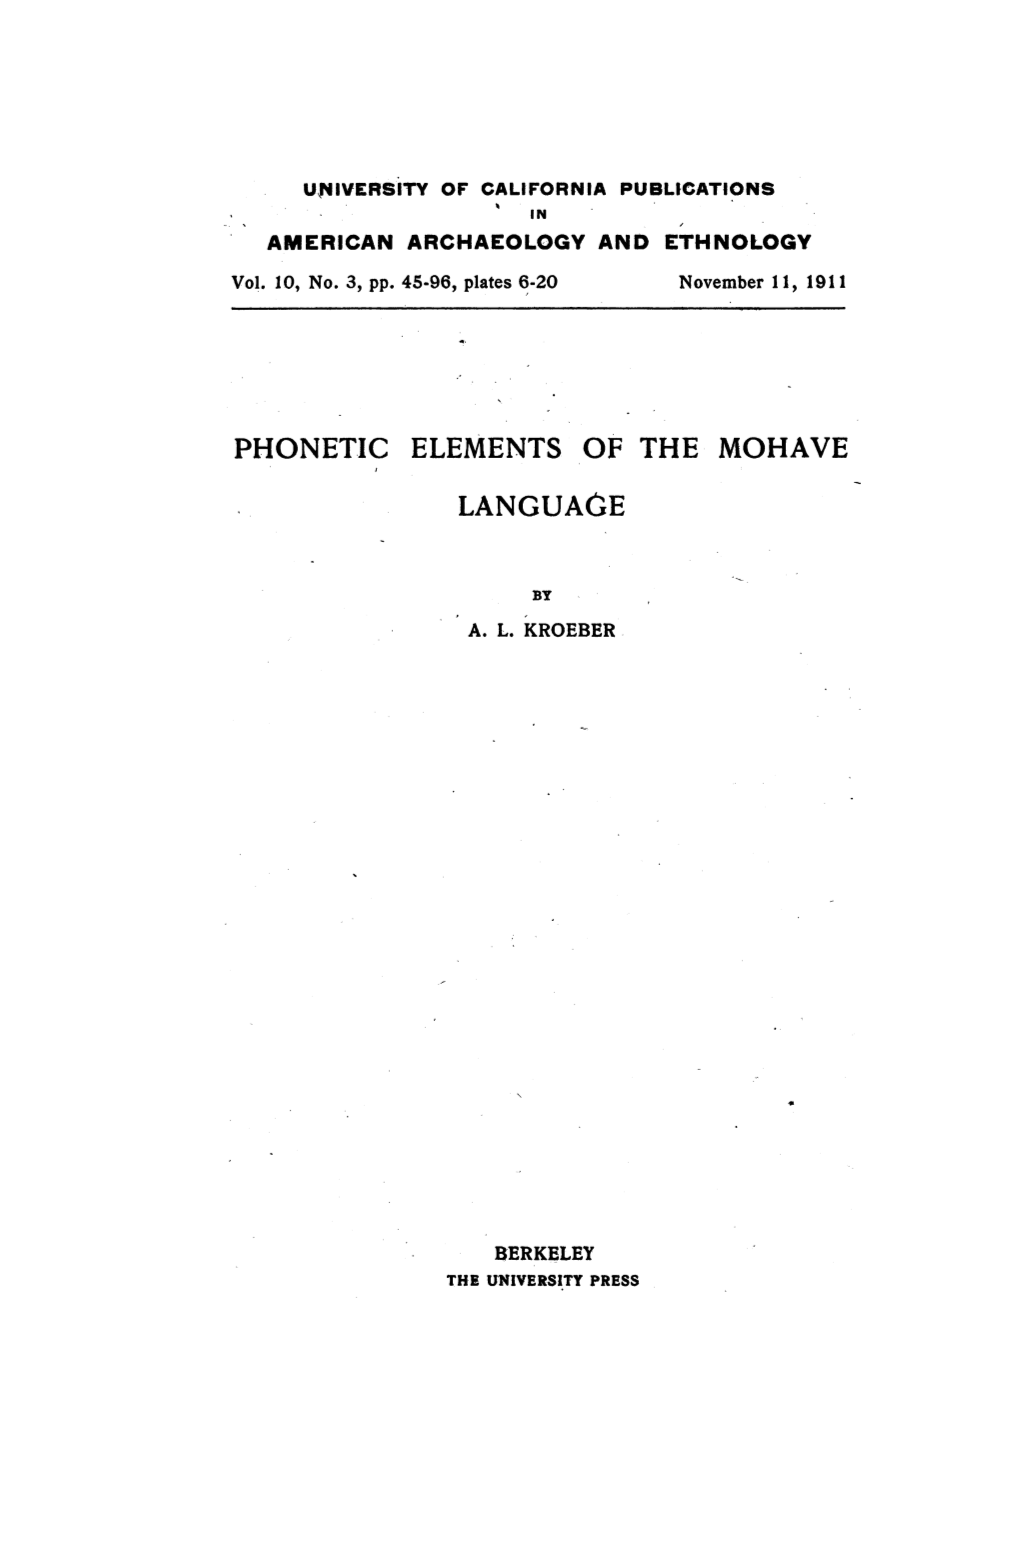 Phonetic Elements of the Mohave Language